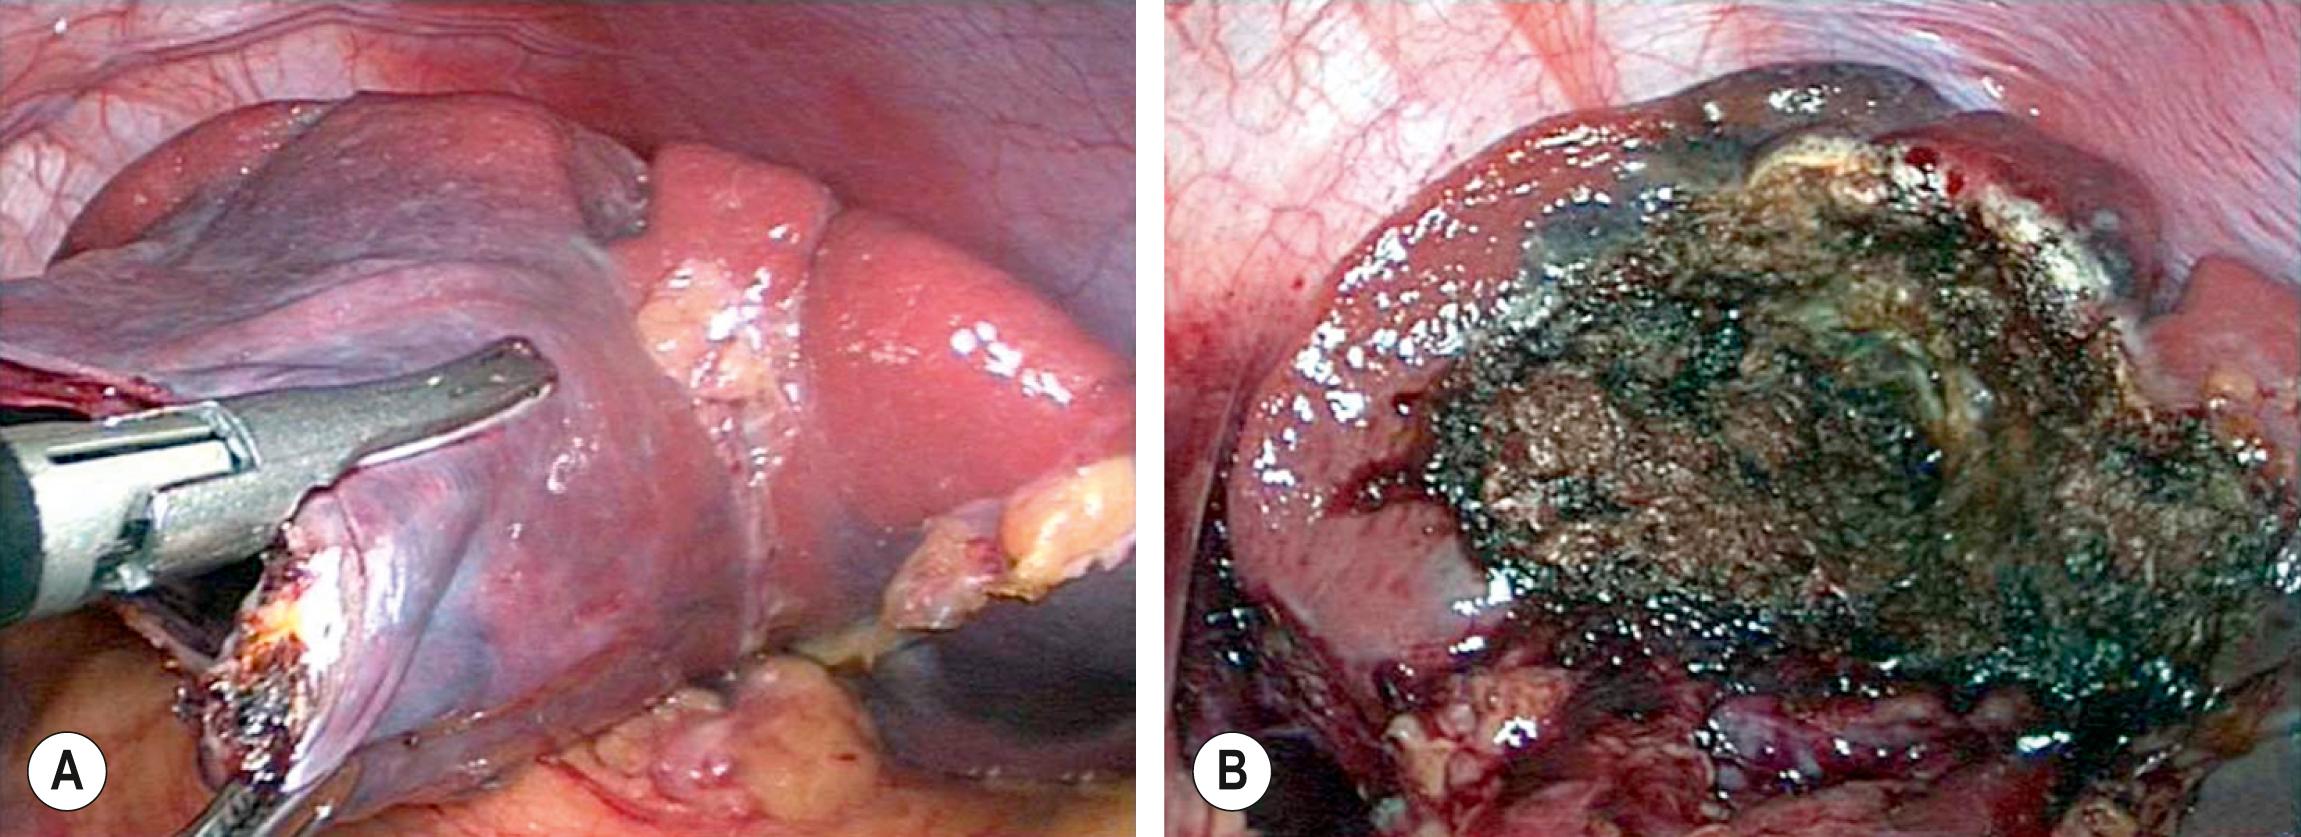 Fig. 47.5, (A) The wall of the large epithelial splenic cyst seen in Figure 47.4 is being excised. (B) The cyst was marsupialized, and the remnant lining of the cyst was ablated with the argon beam coagulator.